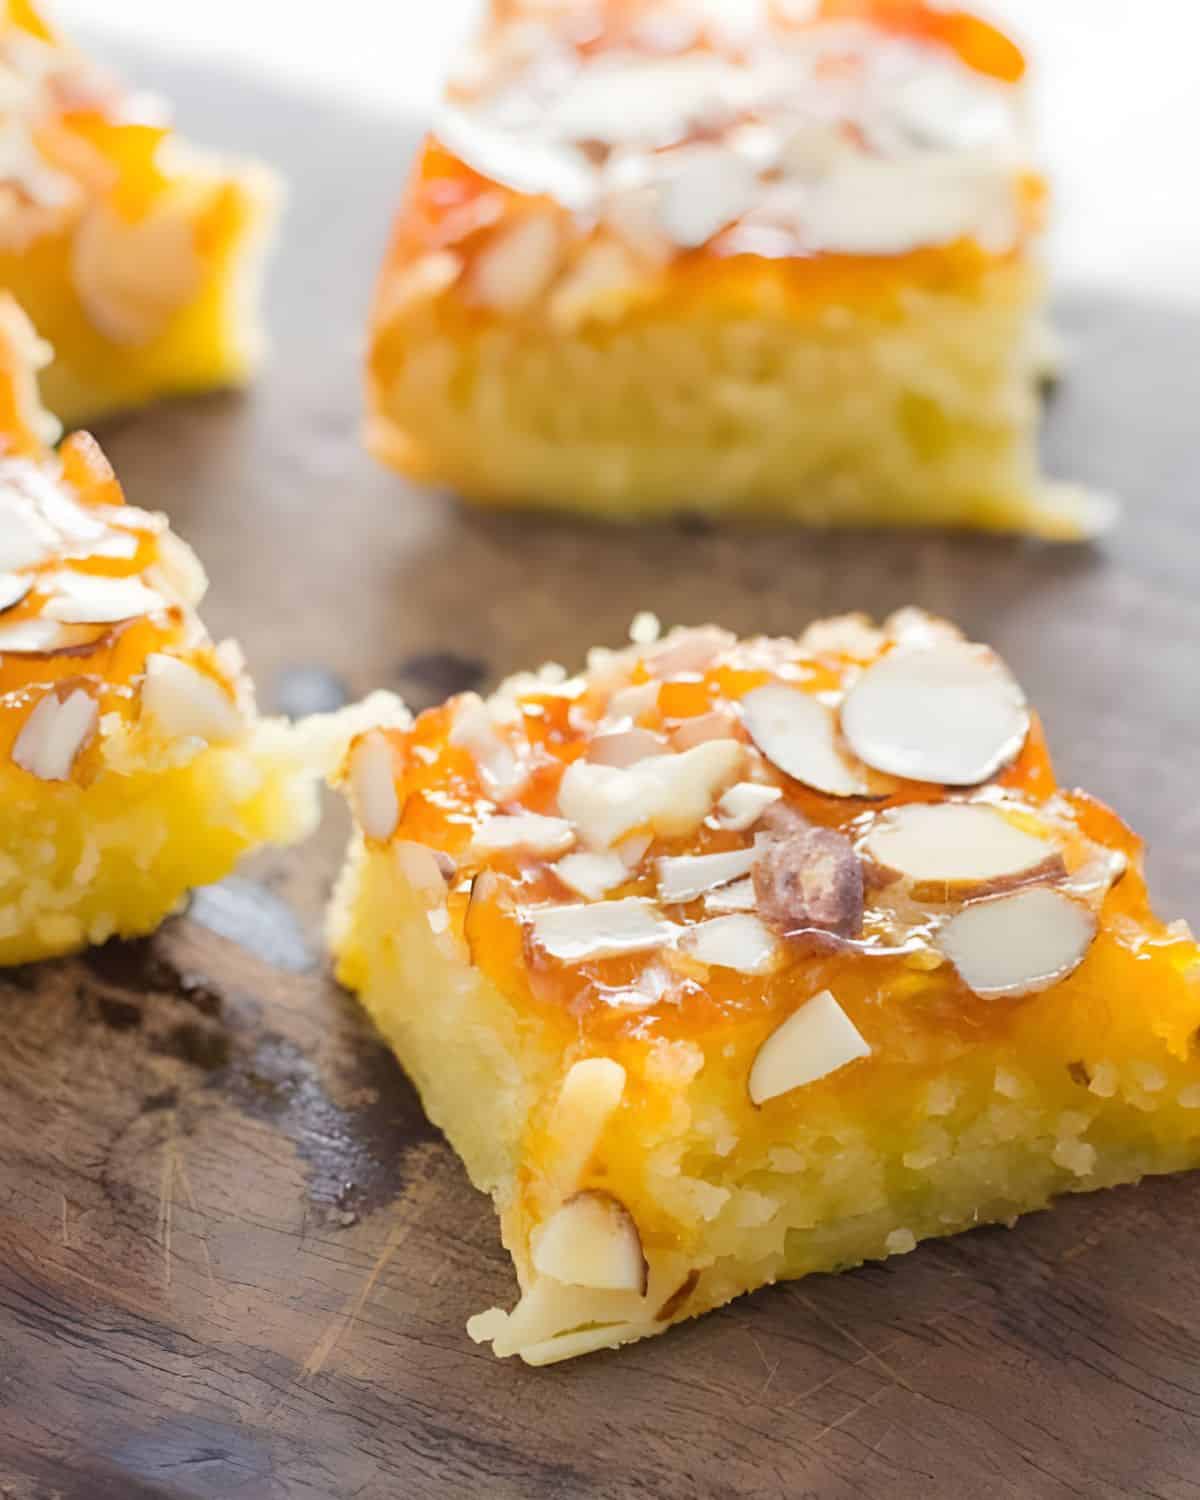 Serving apricot bars on a wooden board.